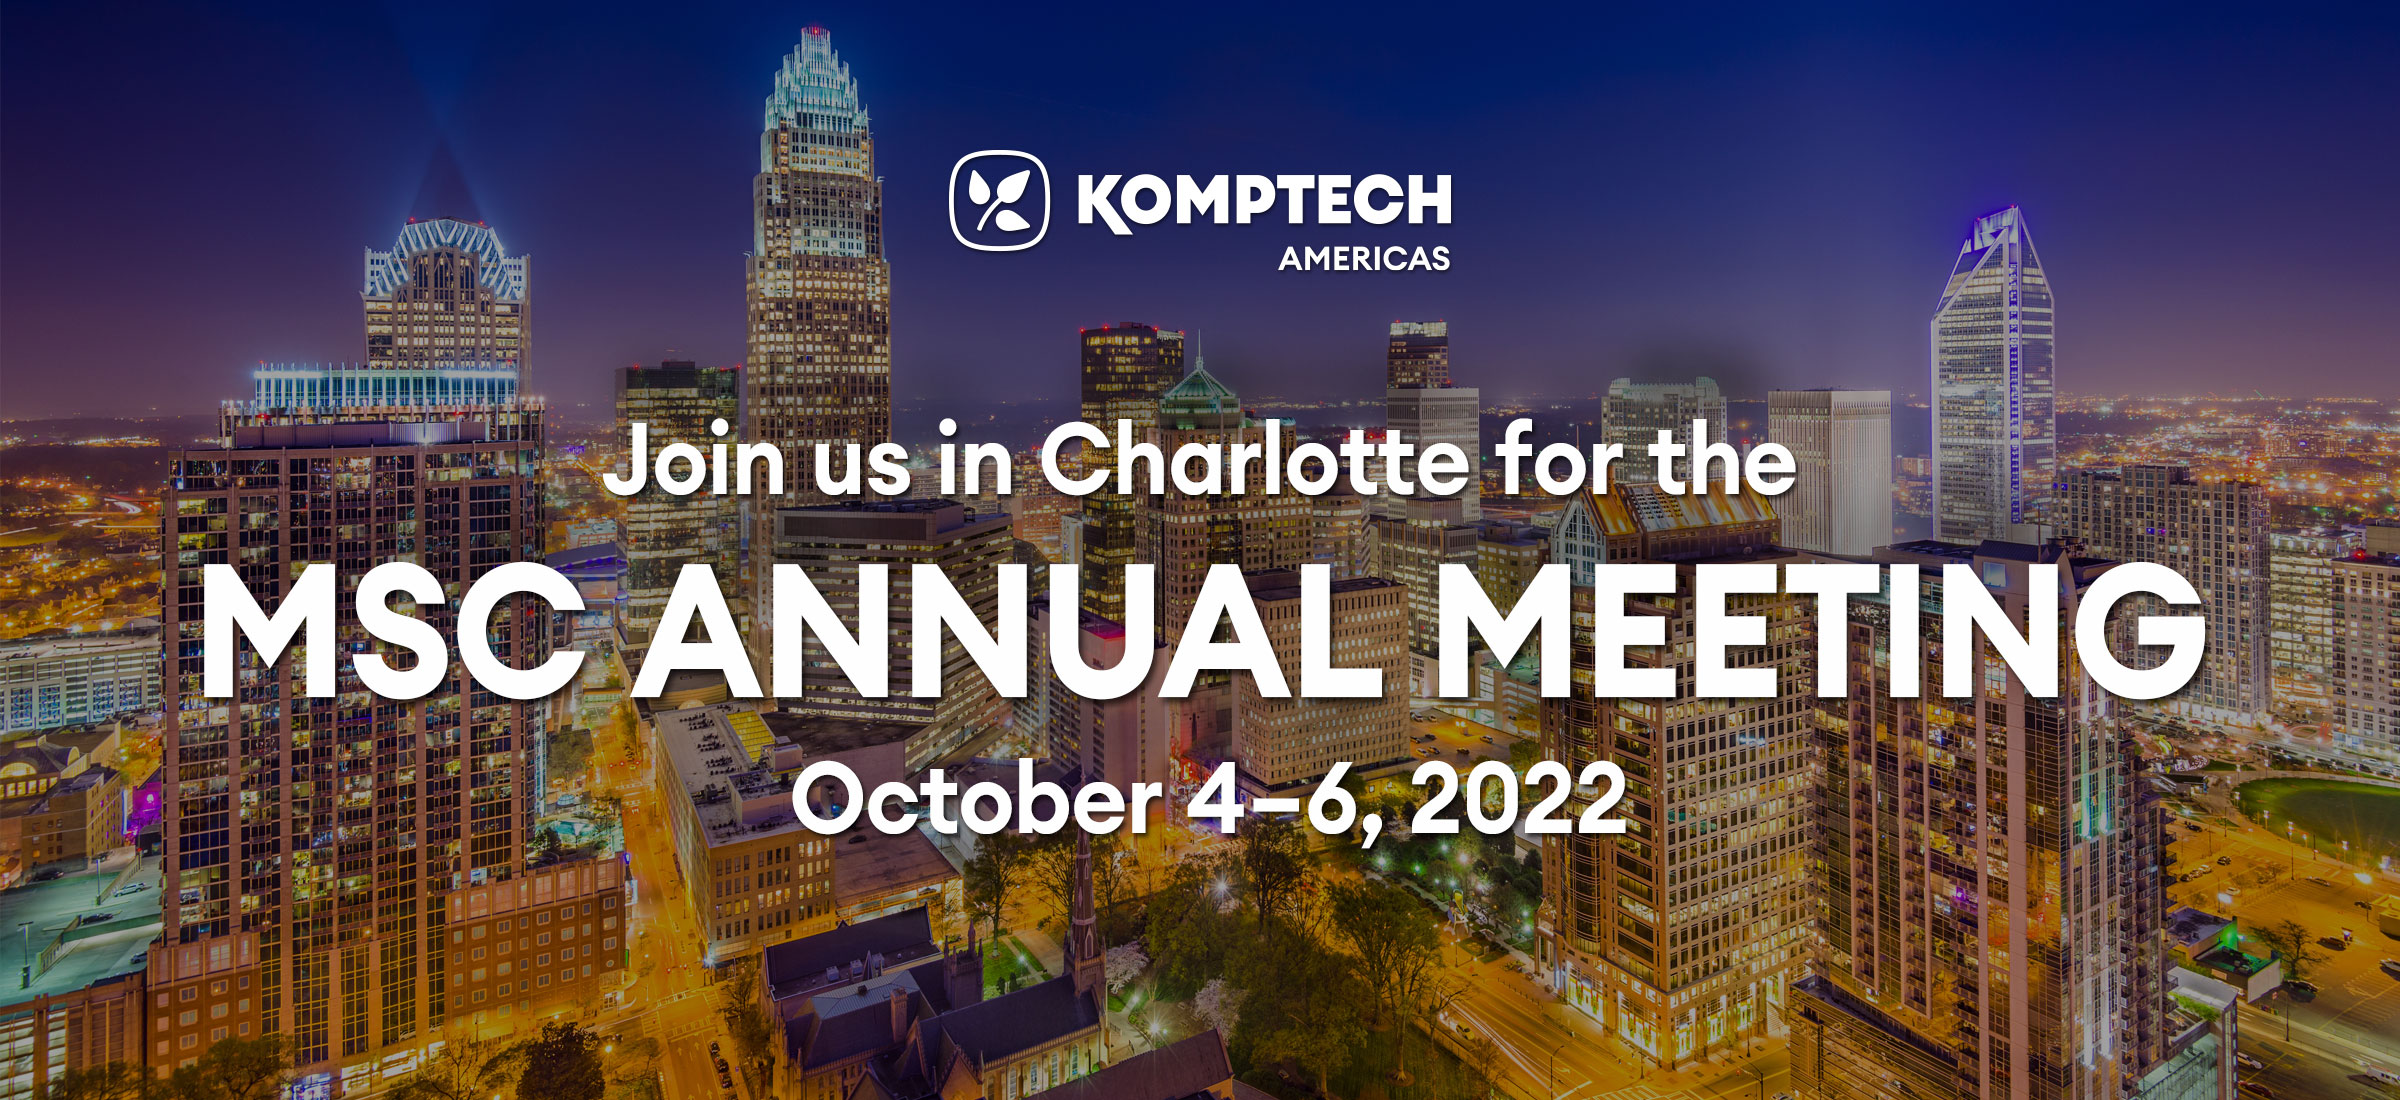 Join us in Charlotte for the MSC Annual Meeting, October 4–6, 2022